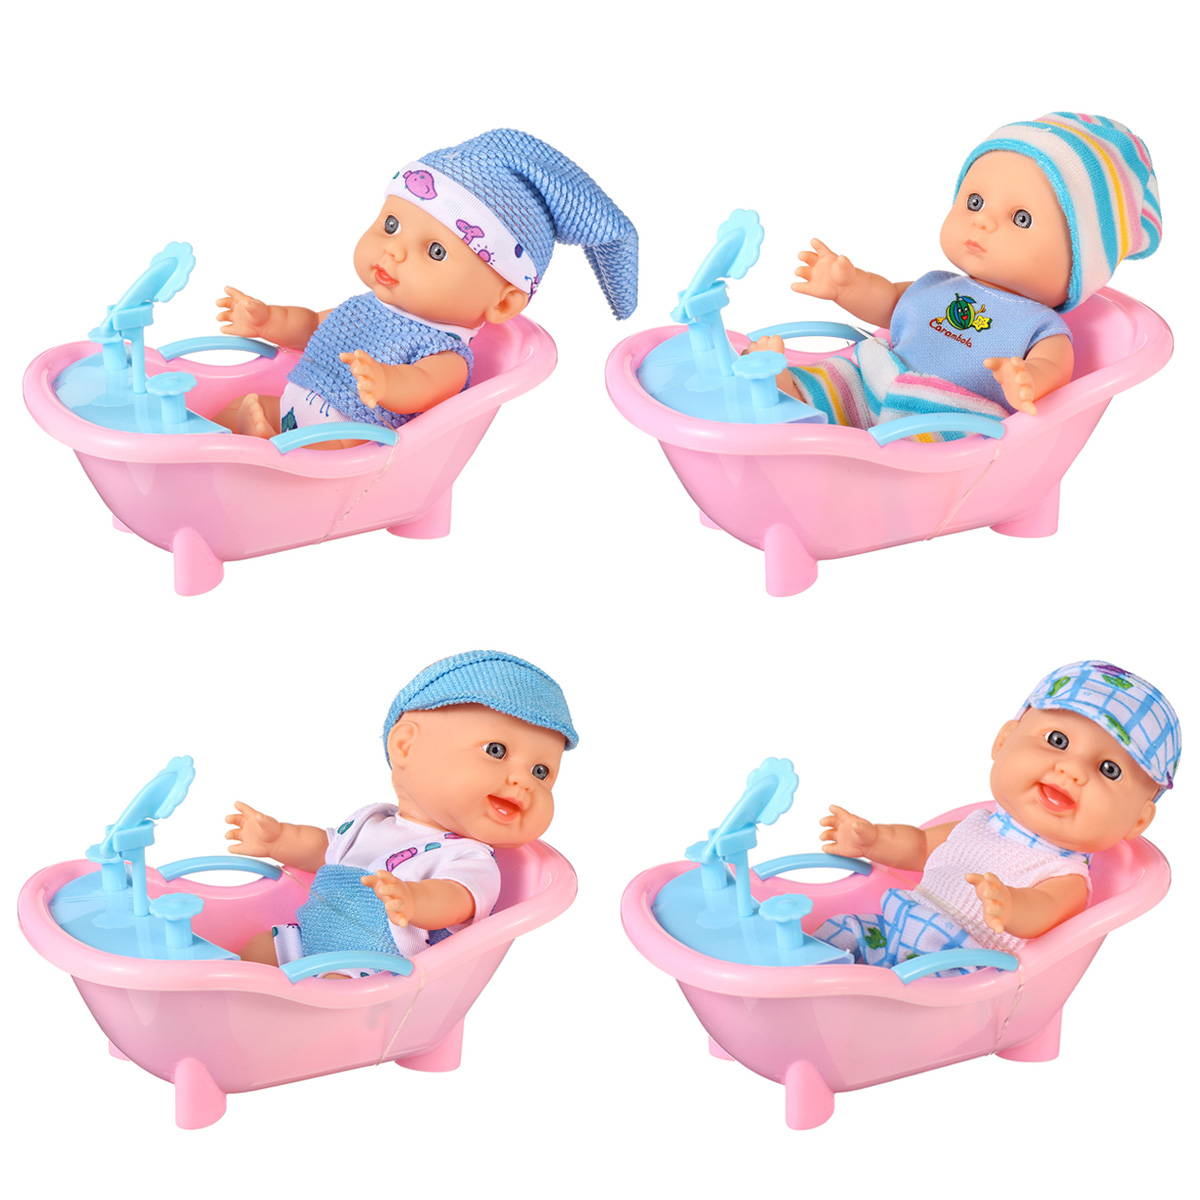 Simulation-Baby-3D-Creative-Cute-Doll-Play-House-Toy-Doll-Vinyl-Doll-Gift-1818656-4